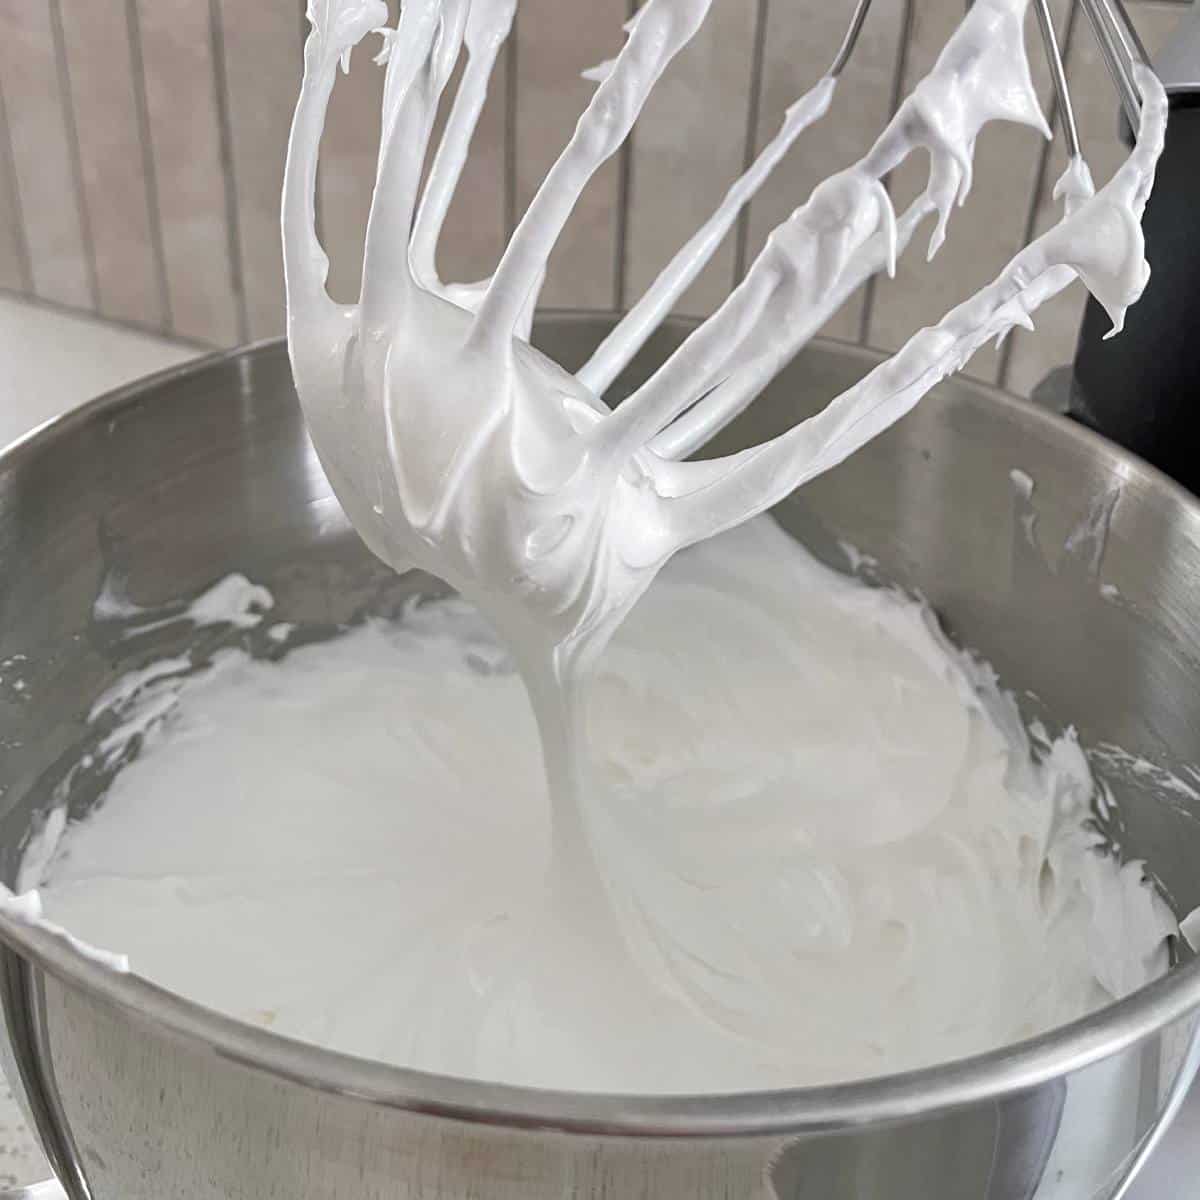 Whisked egg whites and sugar to make meringue in a mixing bowl.